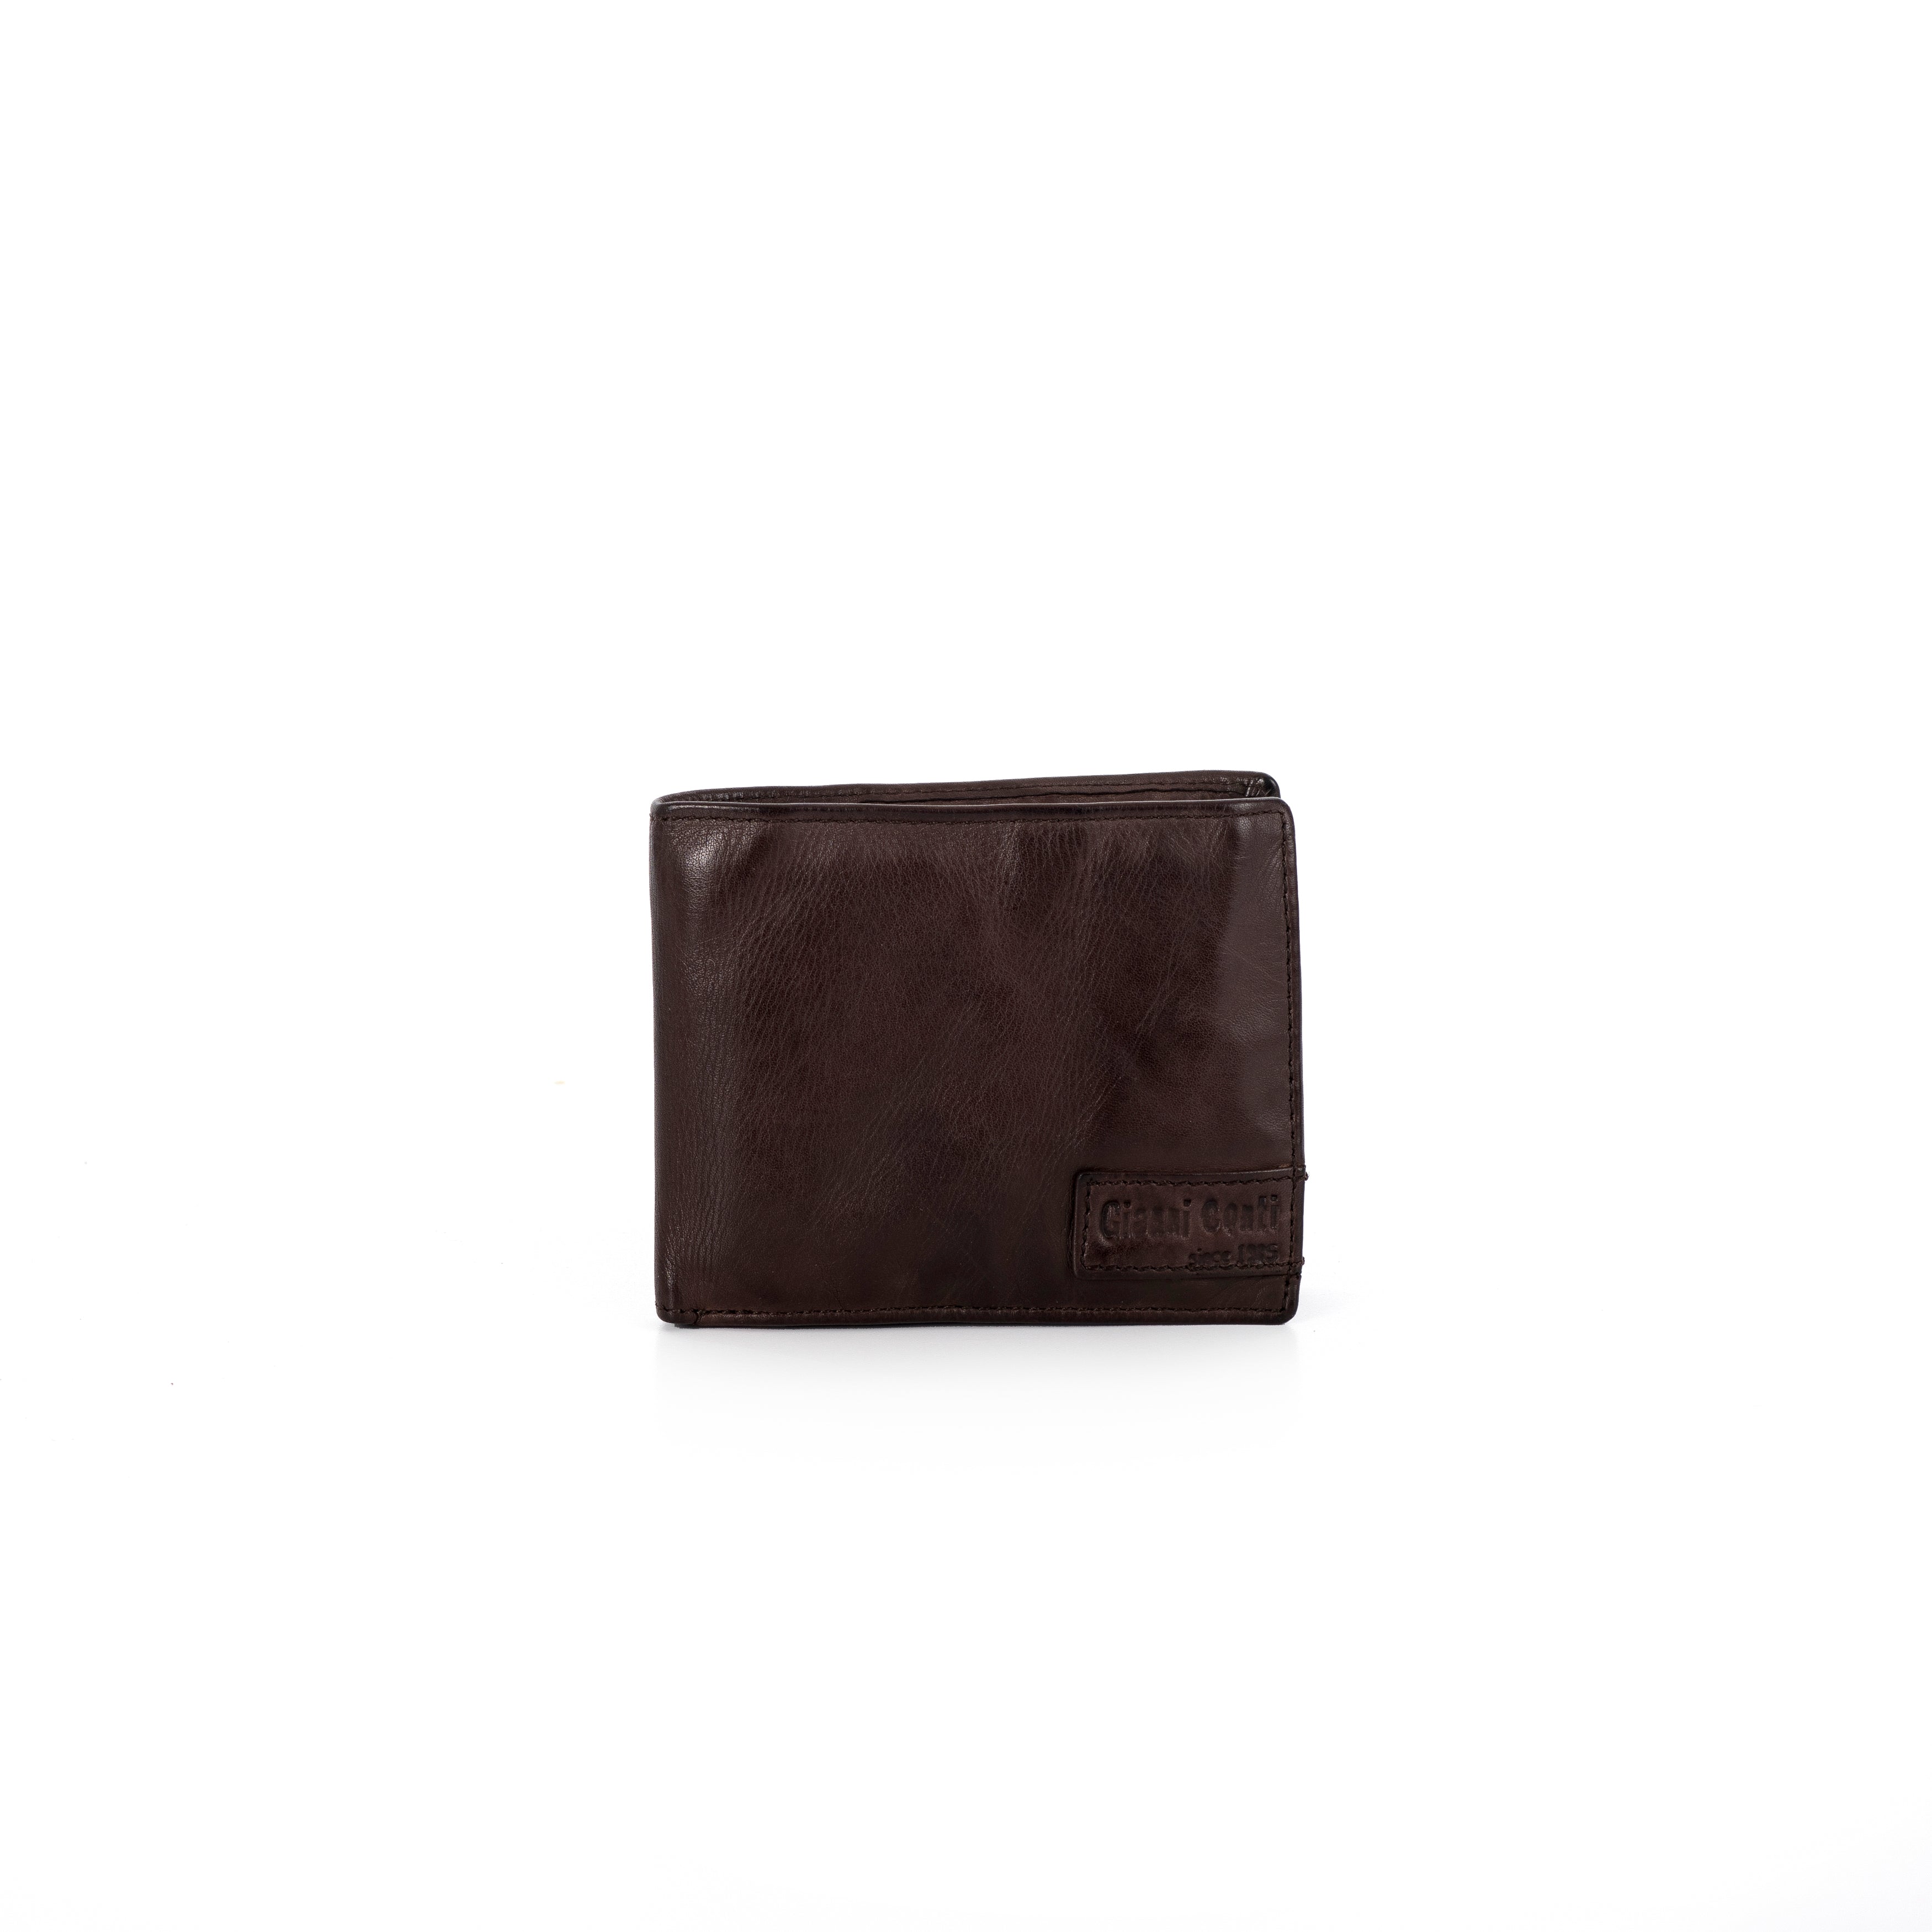 Gianni Conti Leather Wallet PACO - Made in Italy